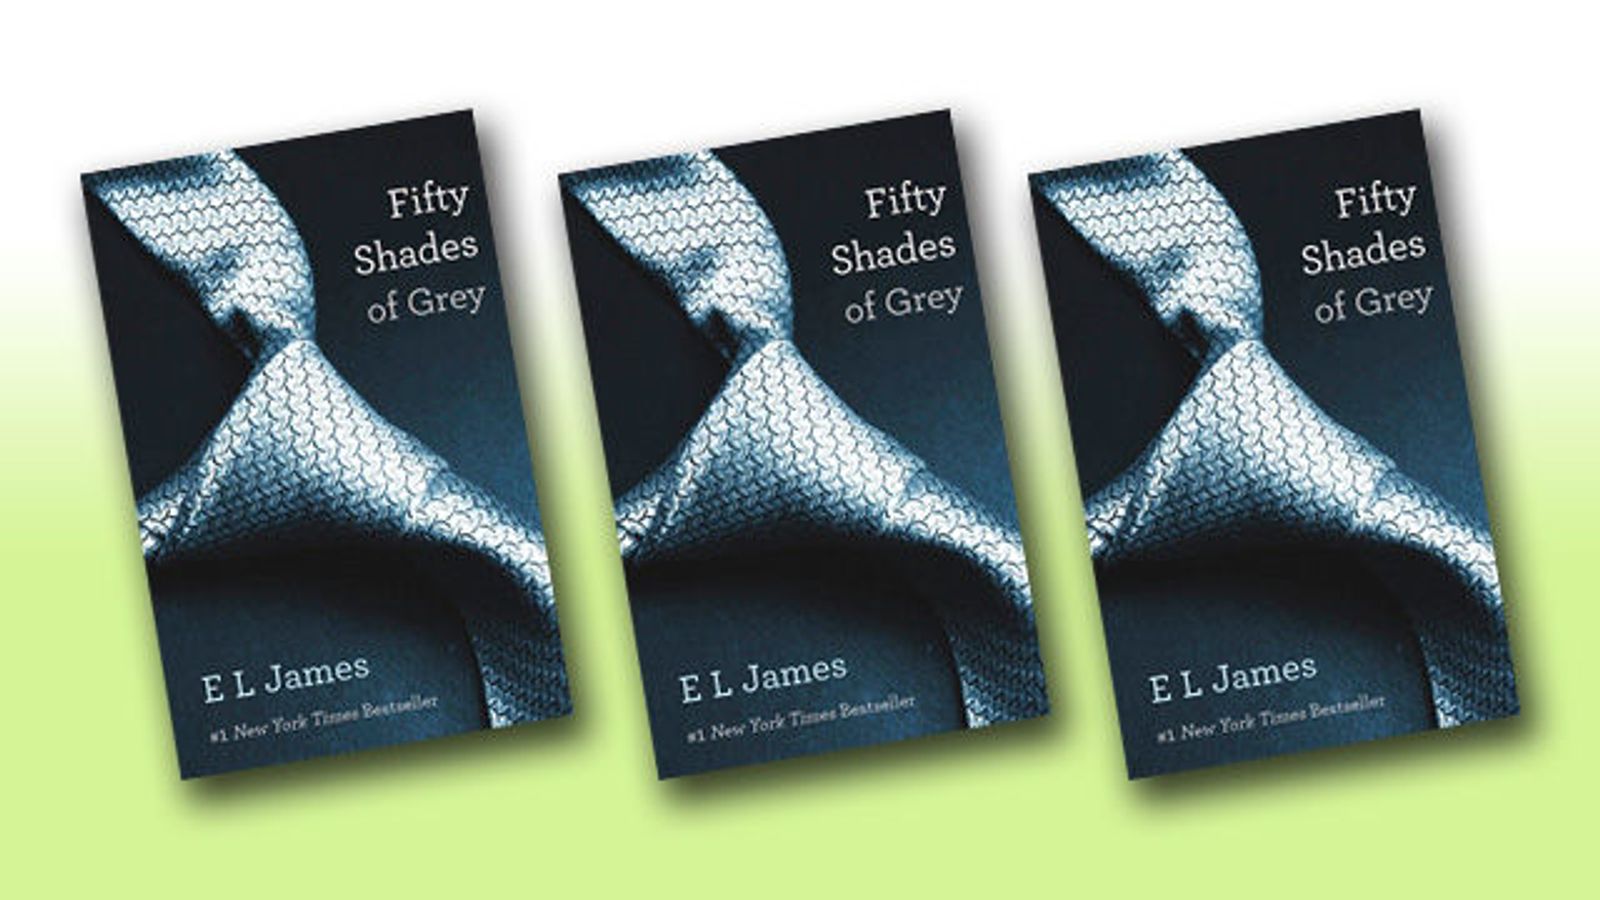 Adult Source Media Vows to Fight 'Fifty Shades' Publisher's C&D